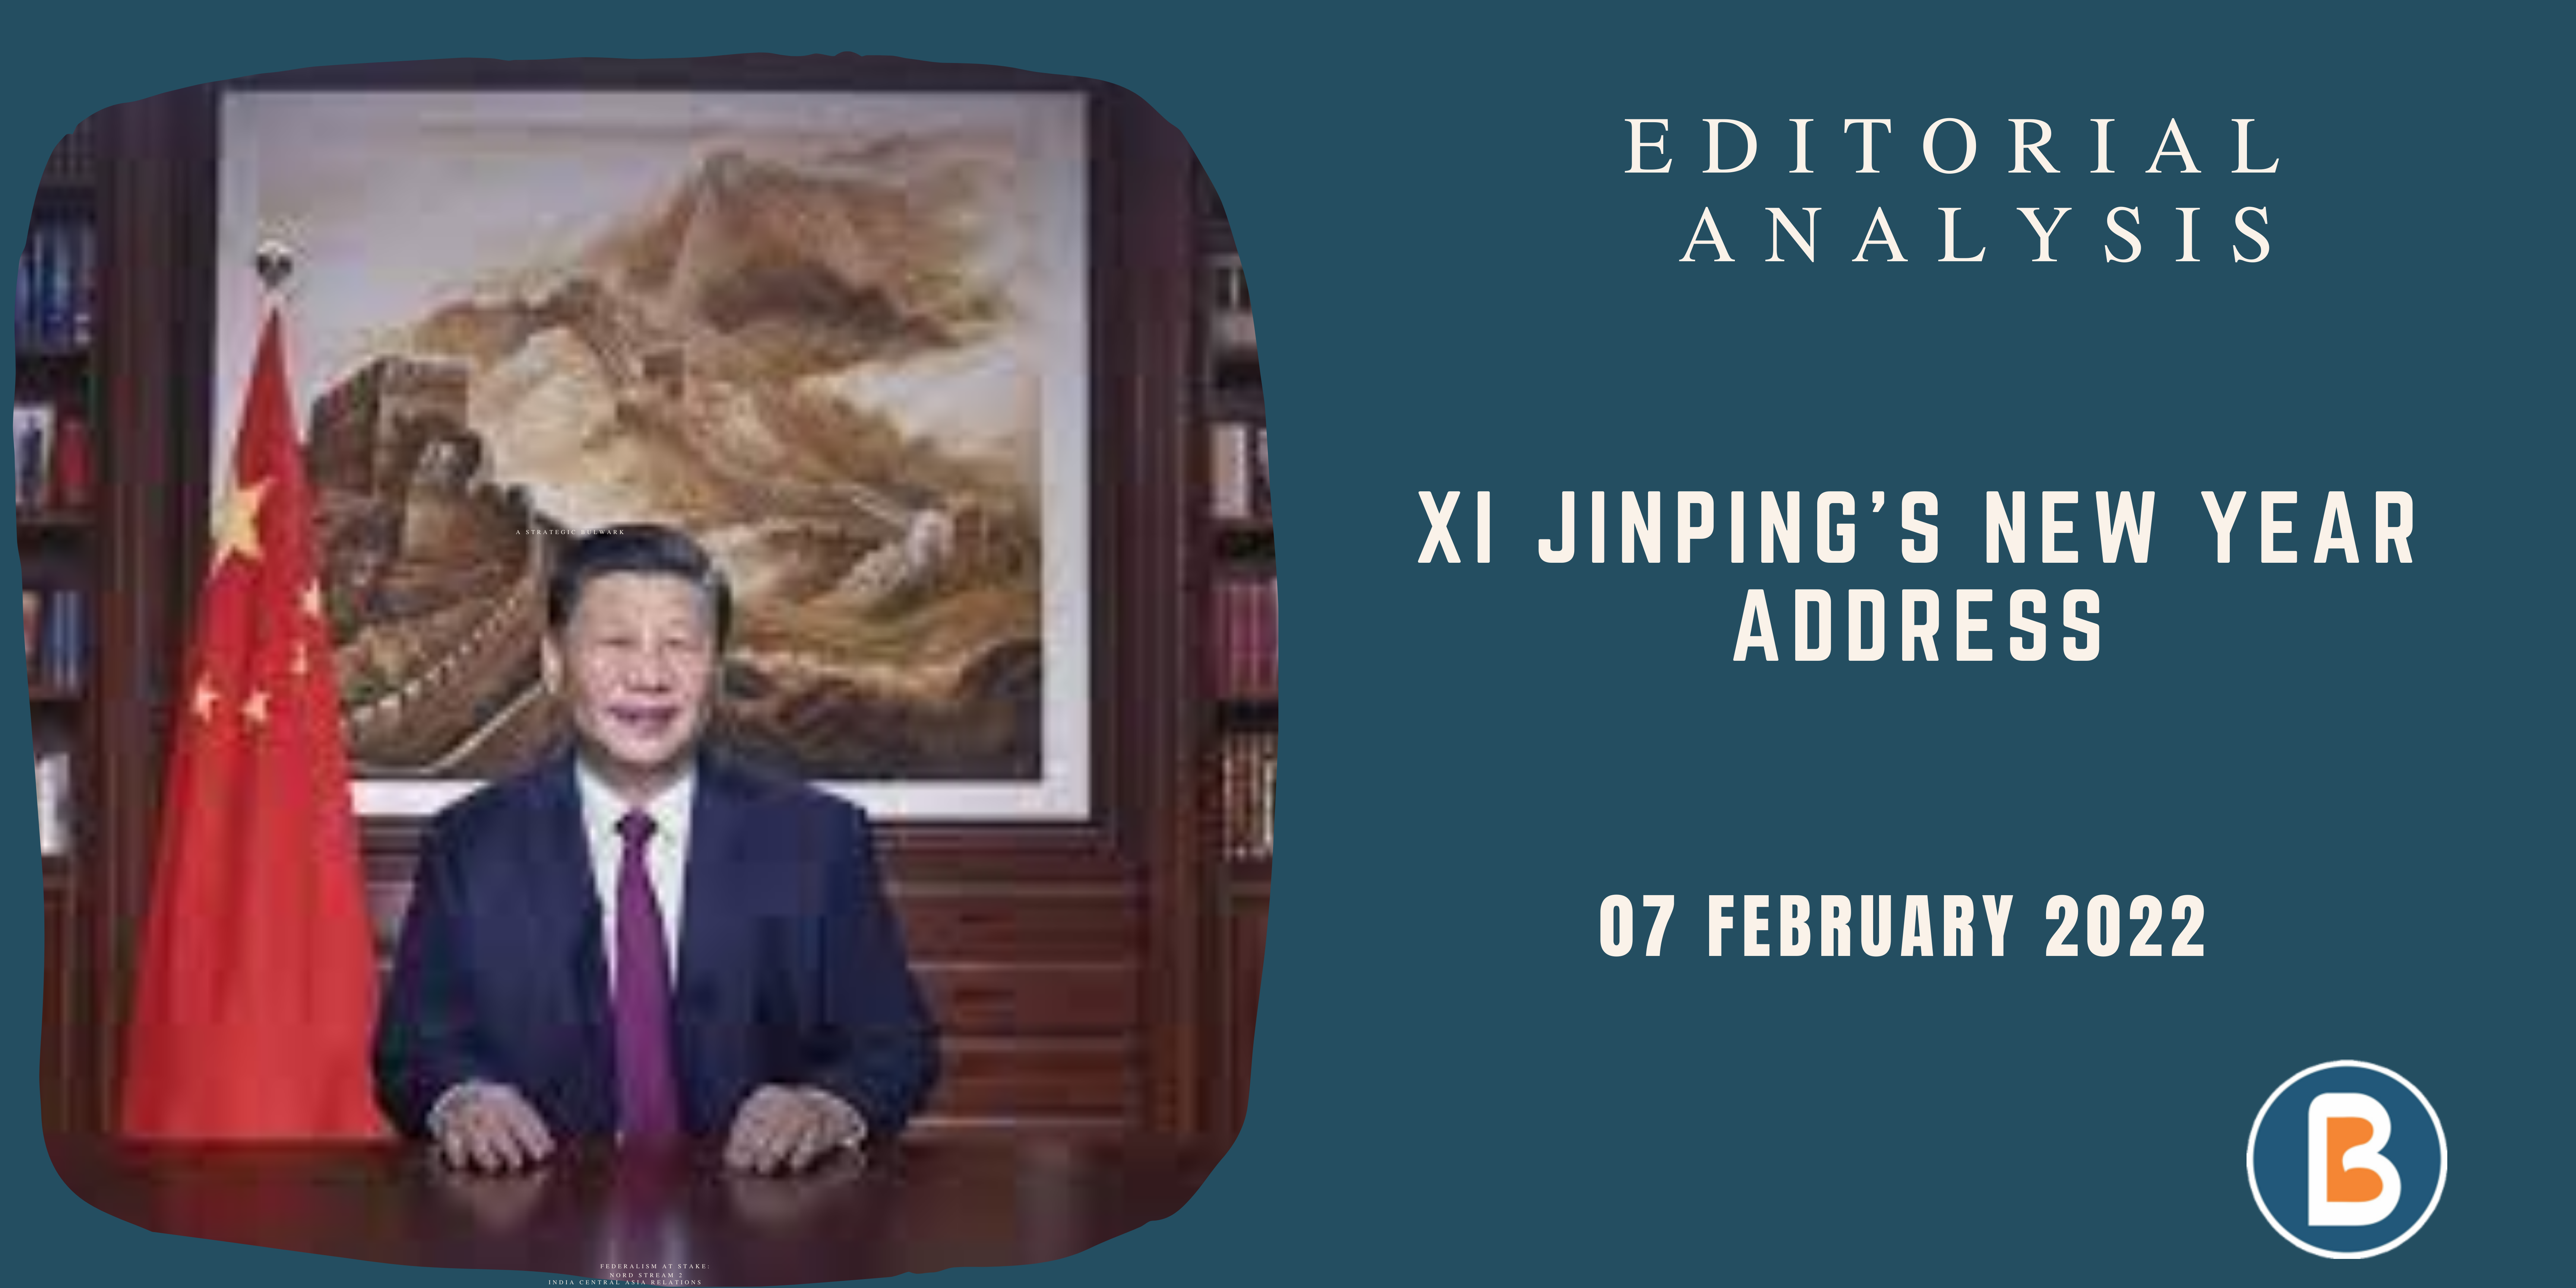 Editorial Analysis for Civil Services - XI Jinping's New Year Address